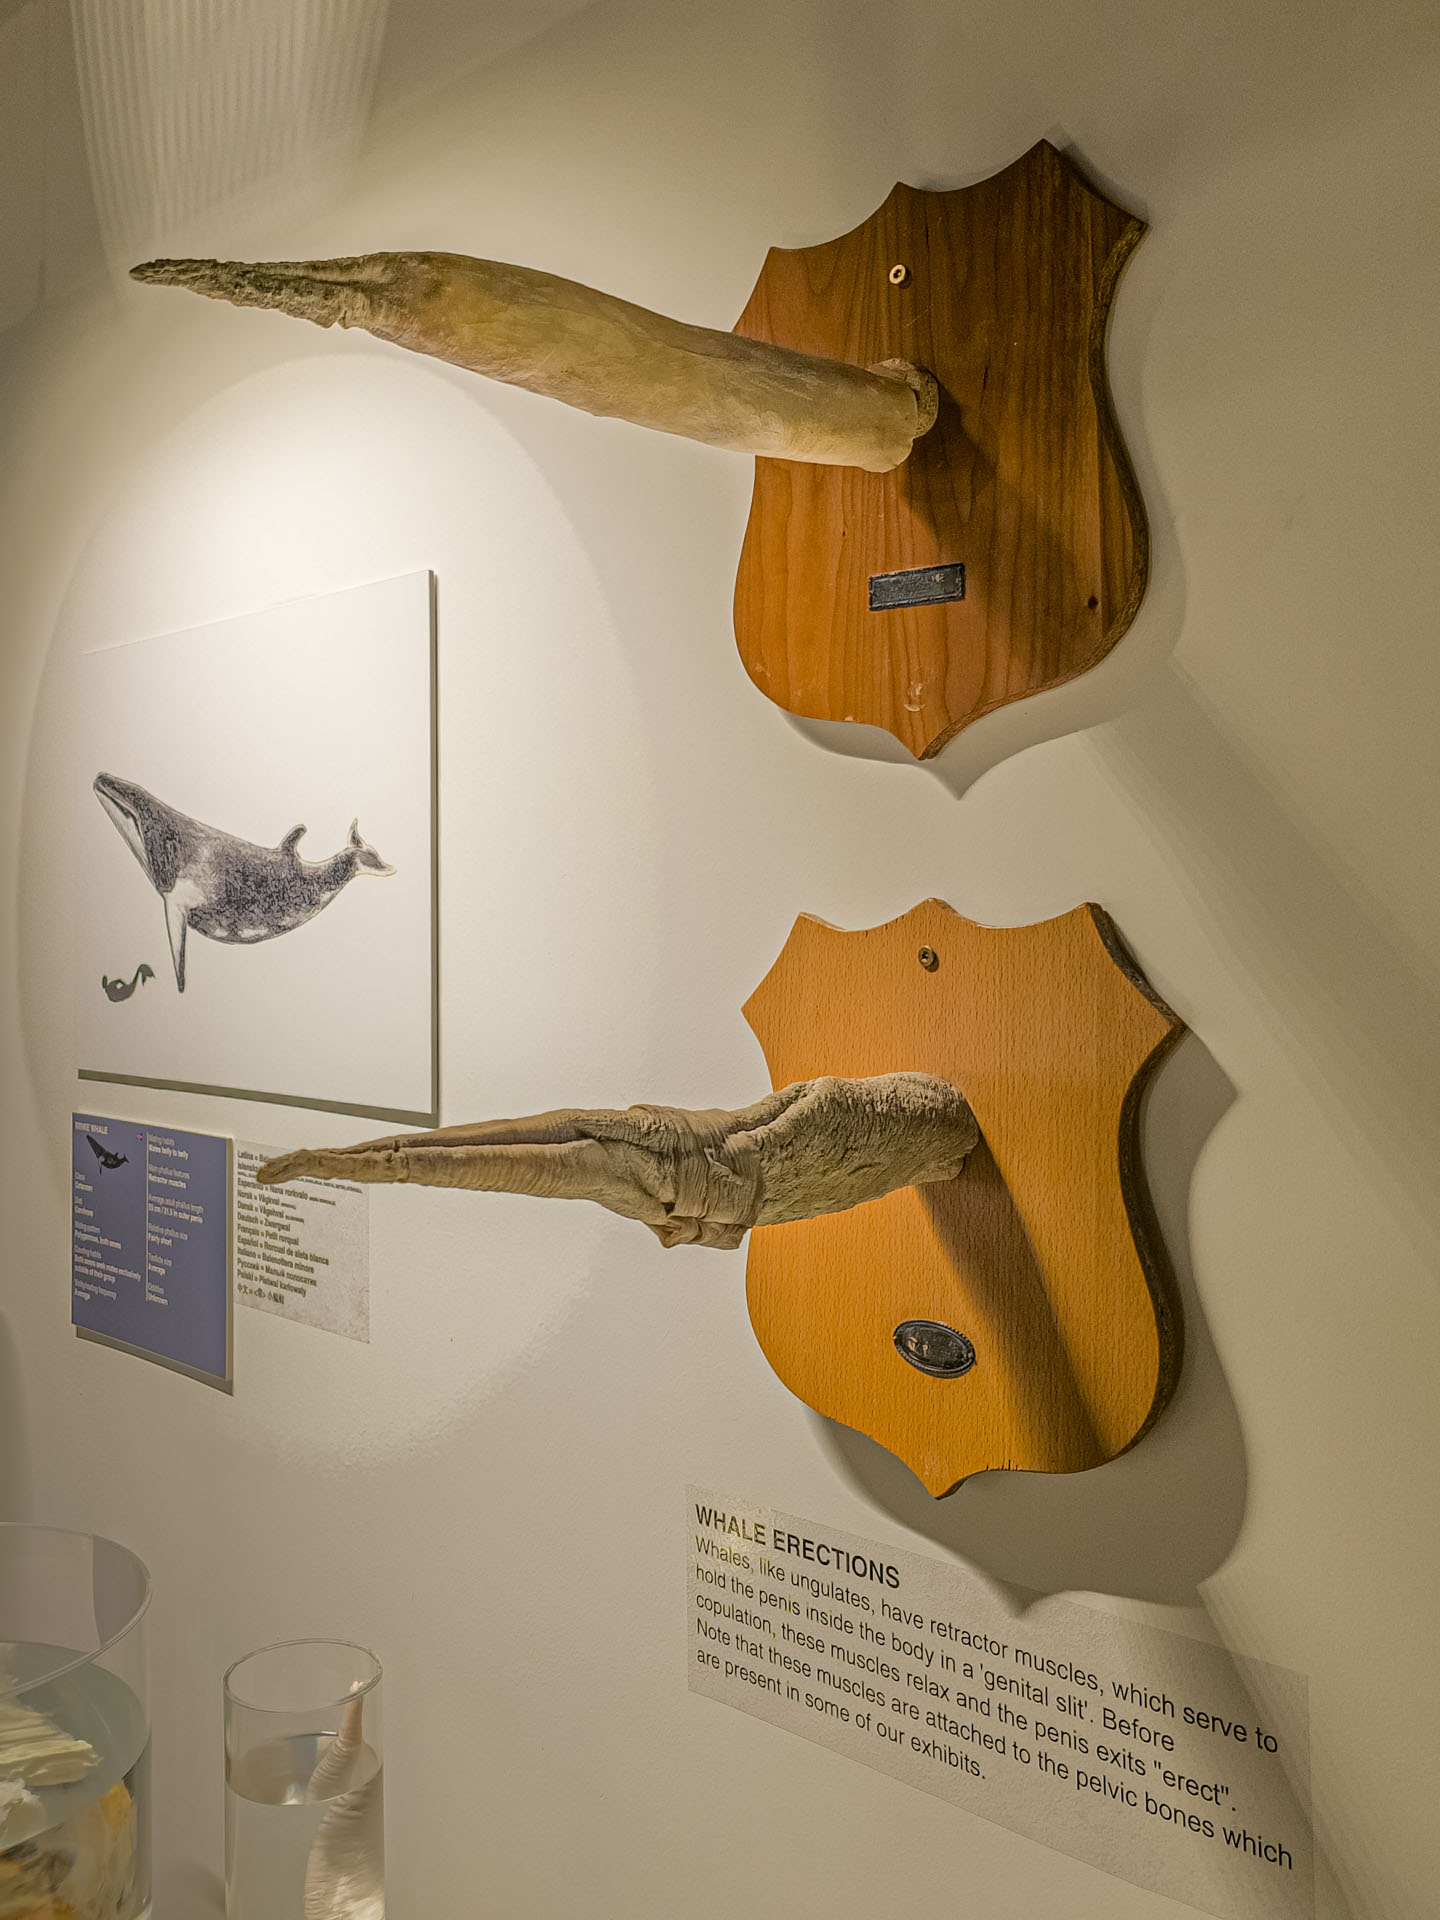 Whale erections at the Icelandic Phallological Museum